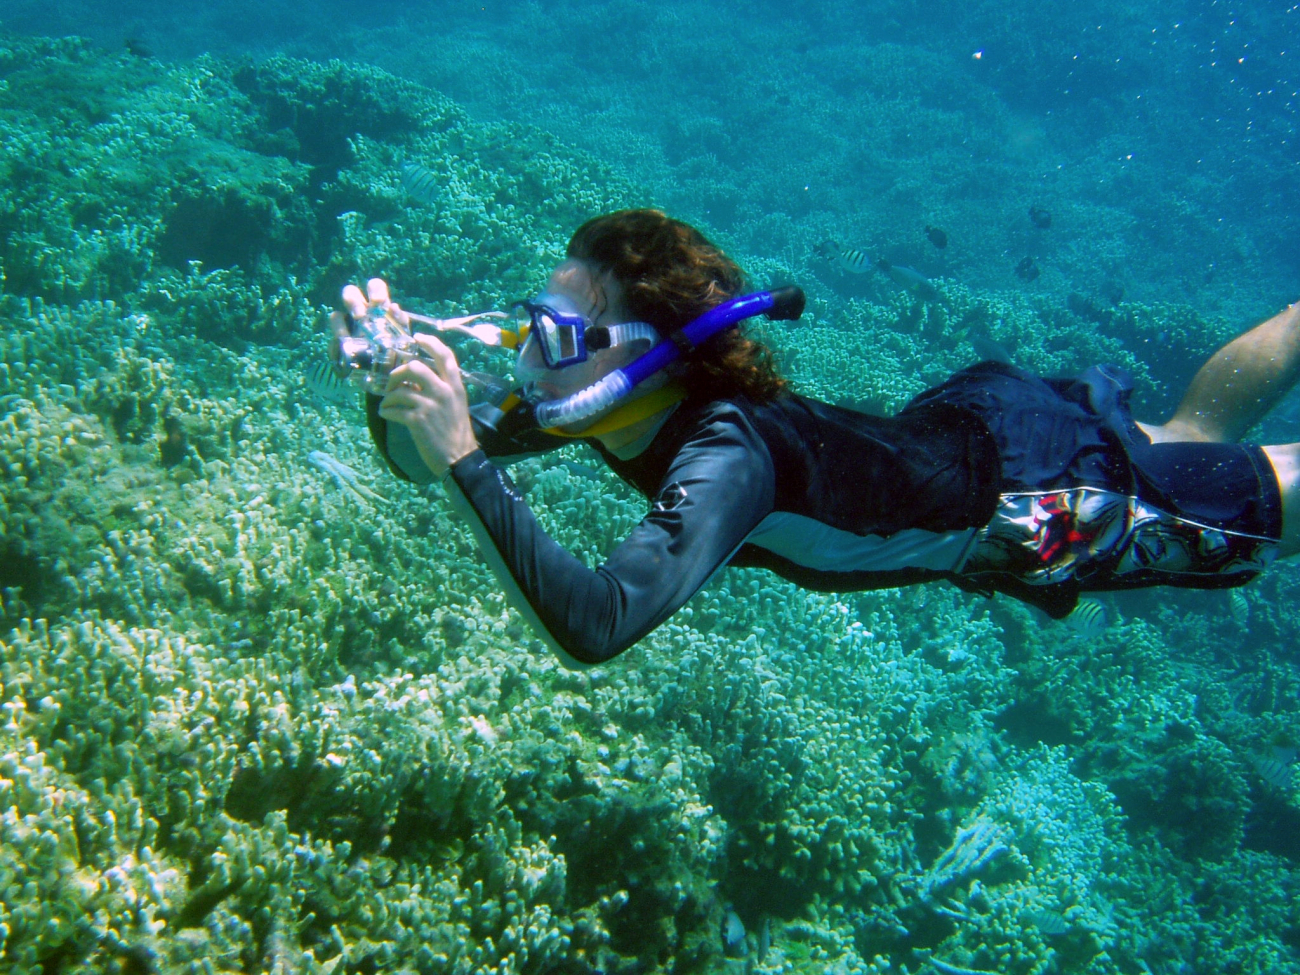 Paulo Maurin photographing reef vistas while snorkeling